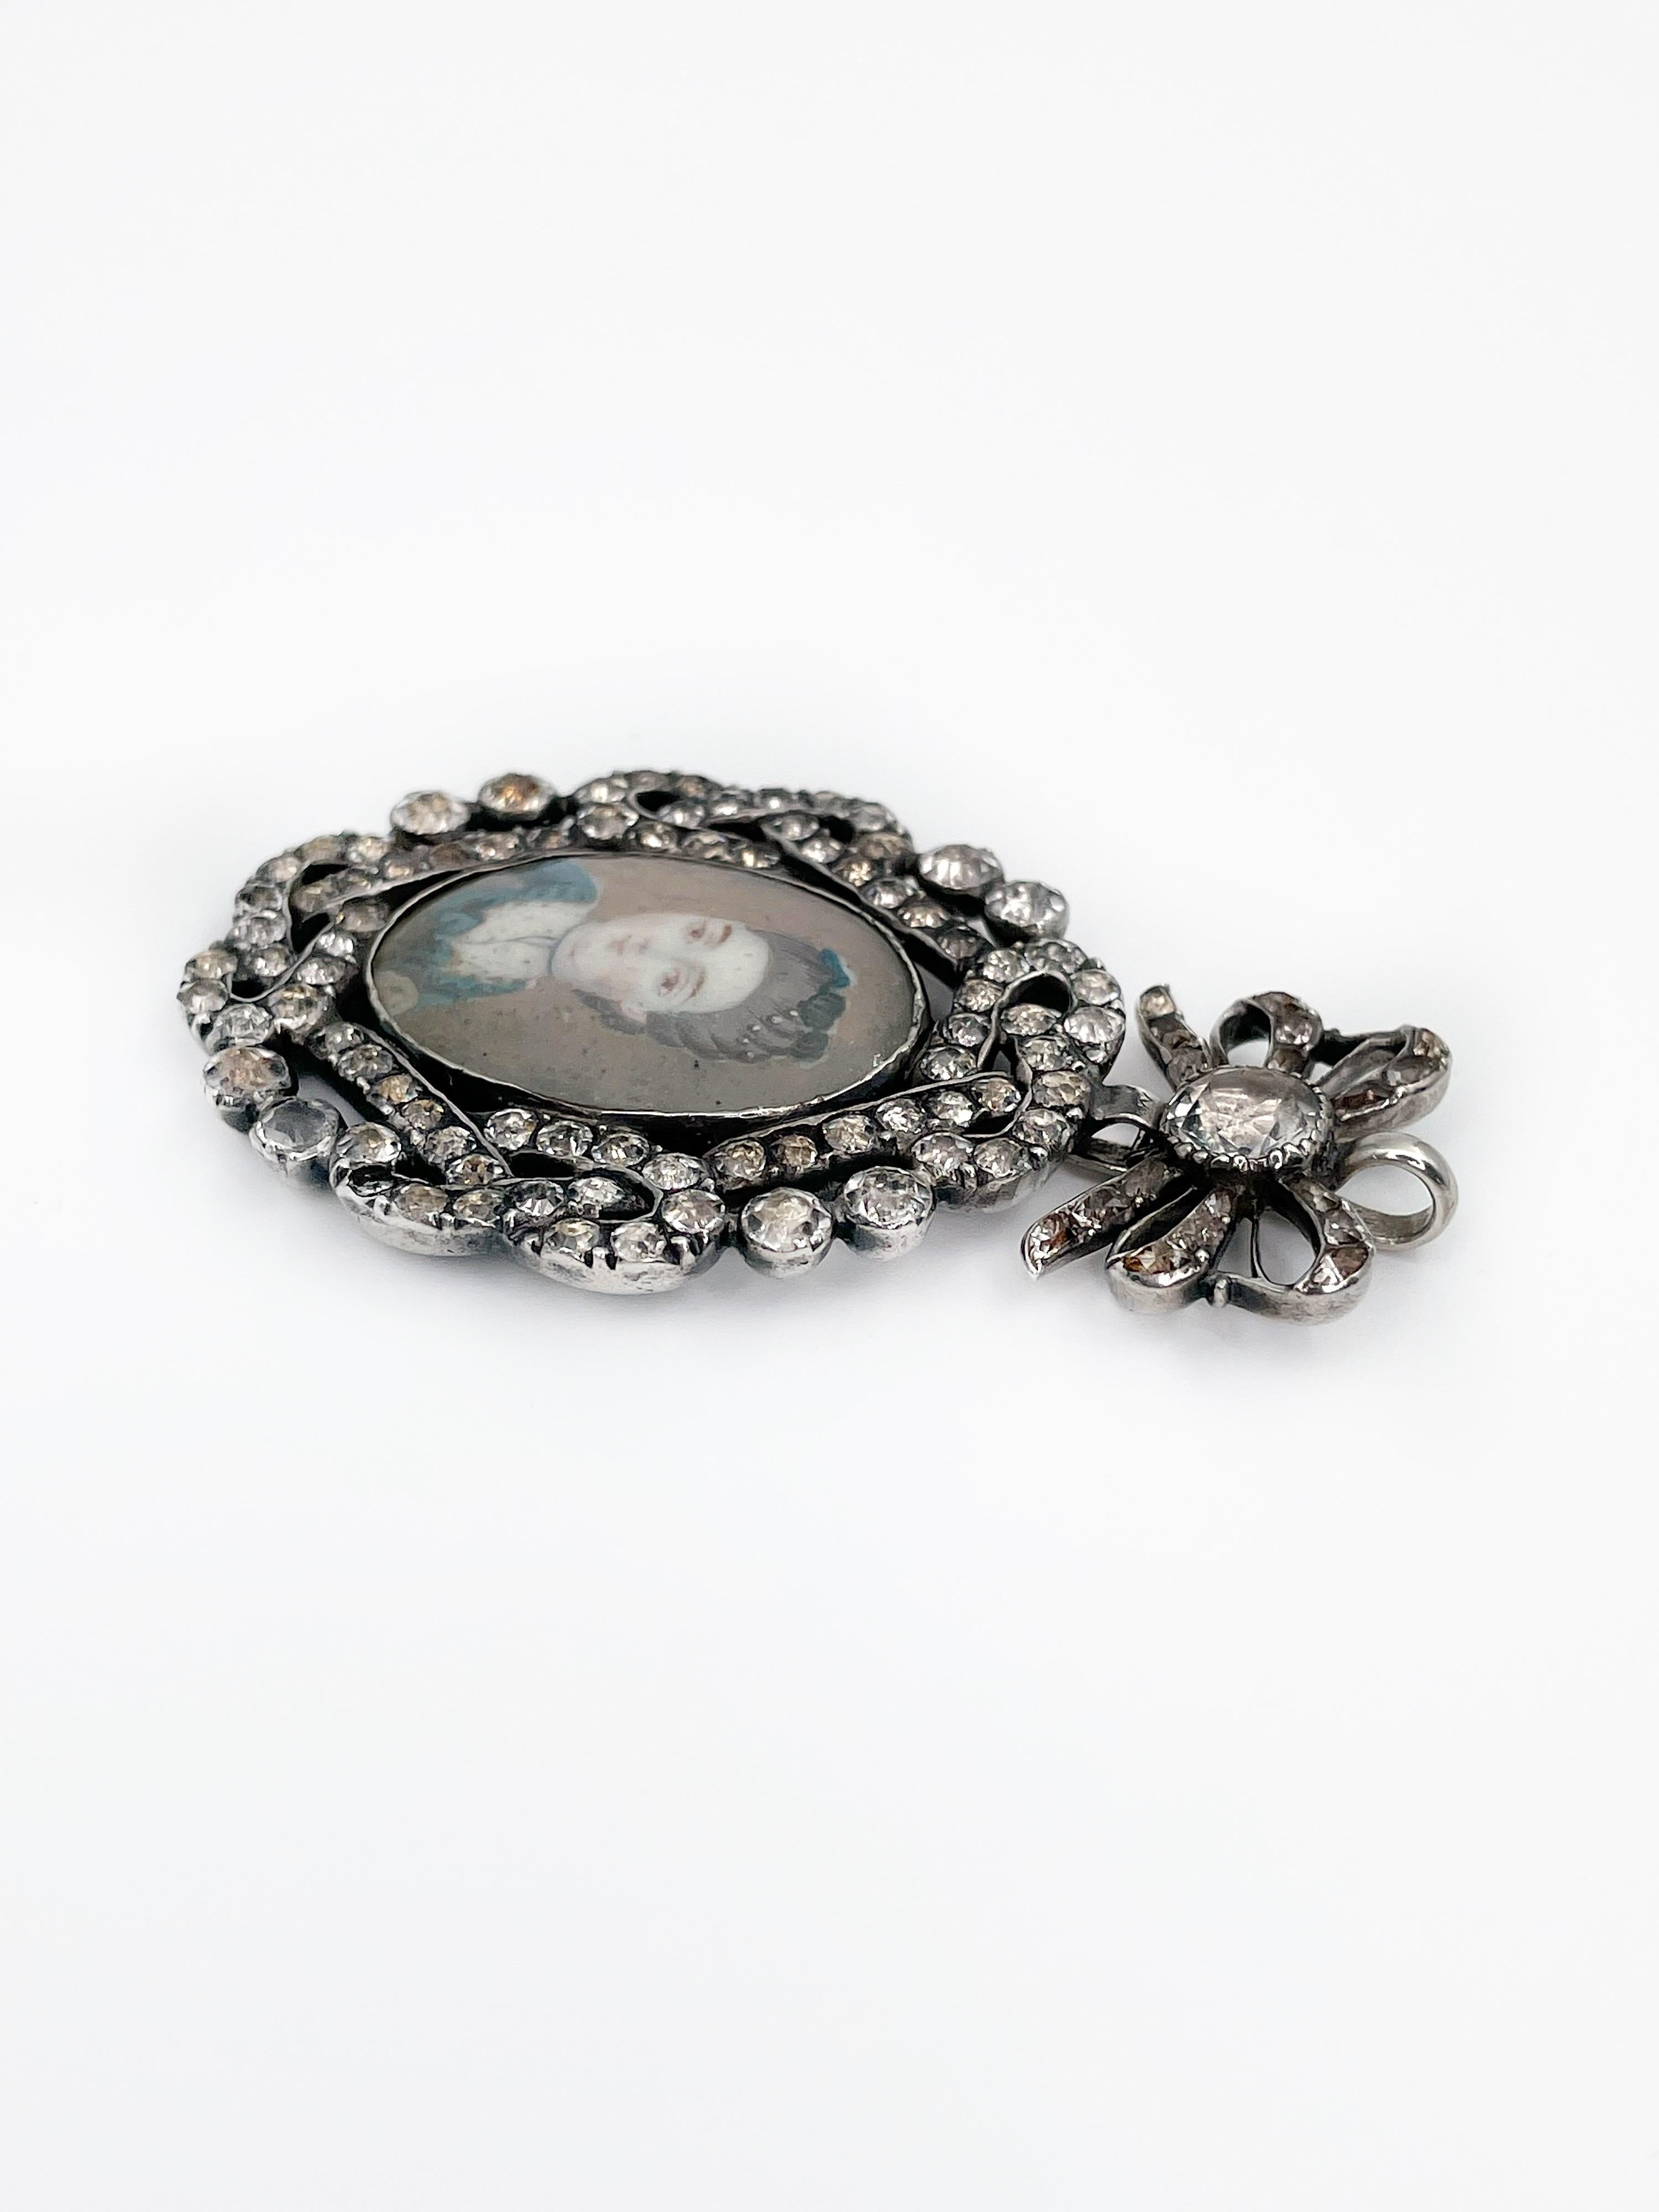 This miniature portrait pendant is an exceptional and collectable piece of jewelry dating from the late 18th century. 

It is crafted in metal and is set with giardinetti paste, which is rare and saught after. The crystals vary slightly in color and